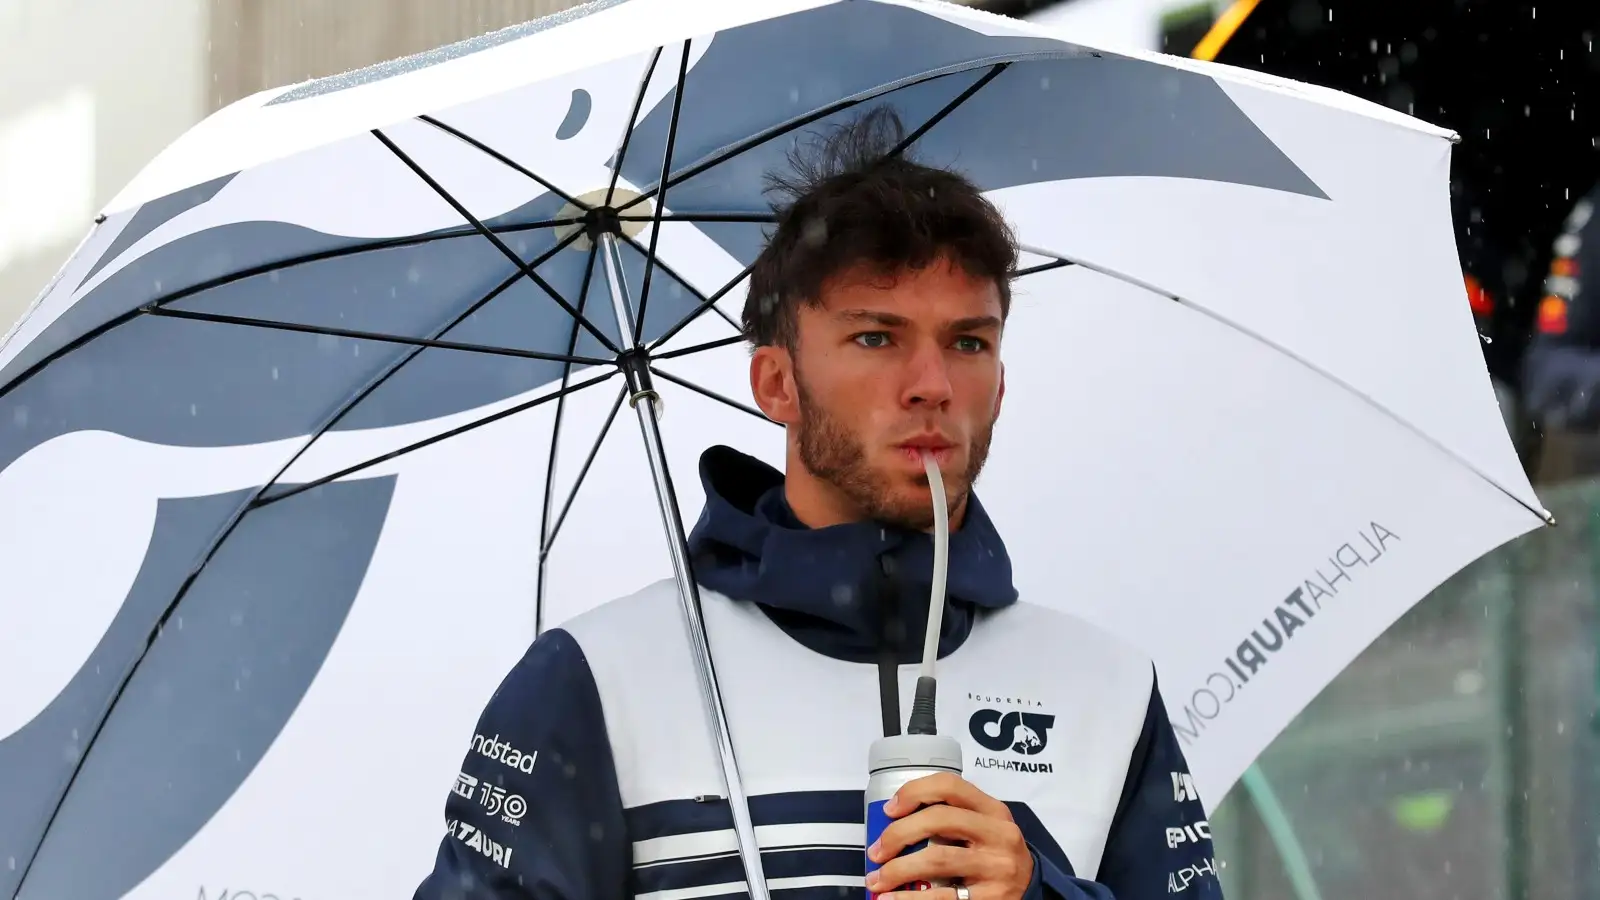 Pierre Gasly, AlphaTauri, with a drink and umbrella. Italy, April 2022.